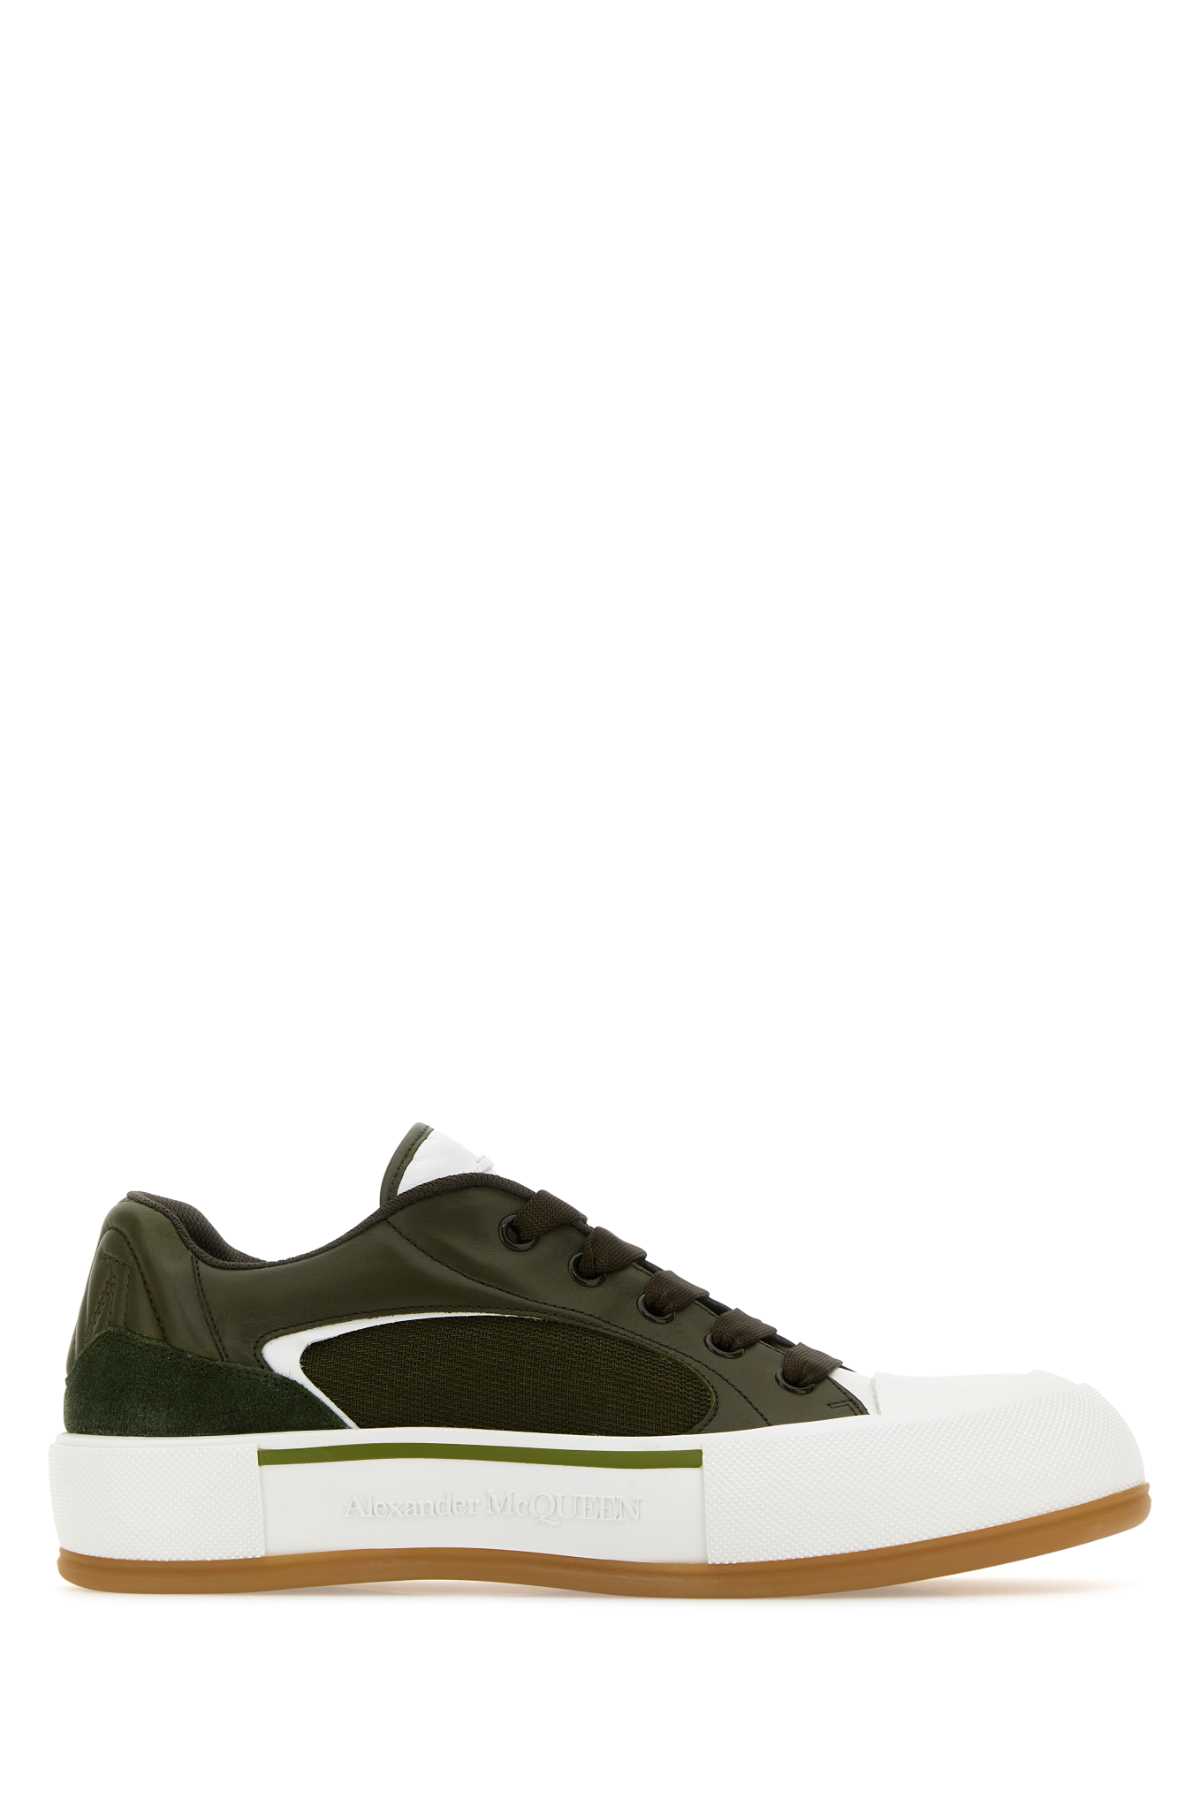 Olive Green Plimsoll Sneakers